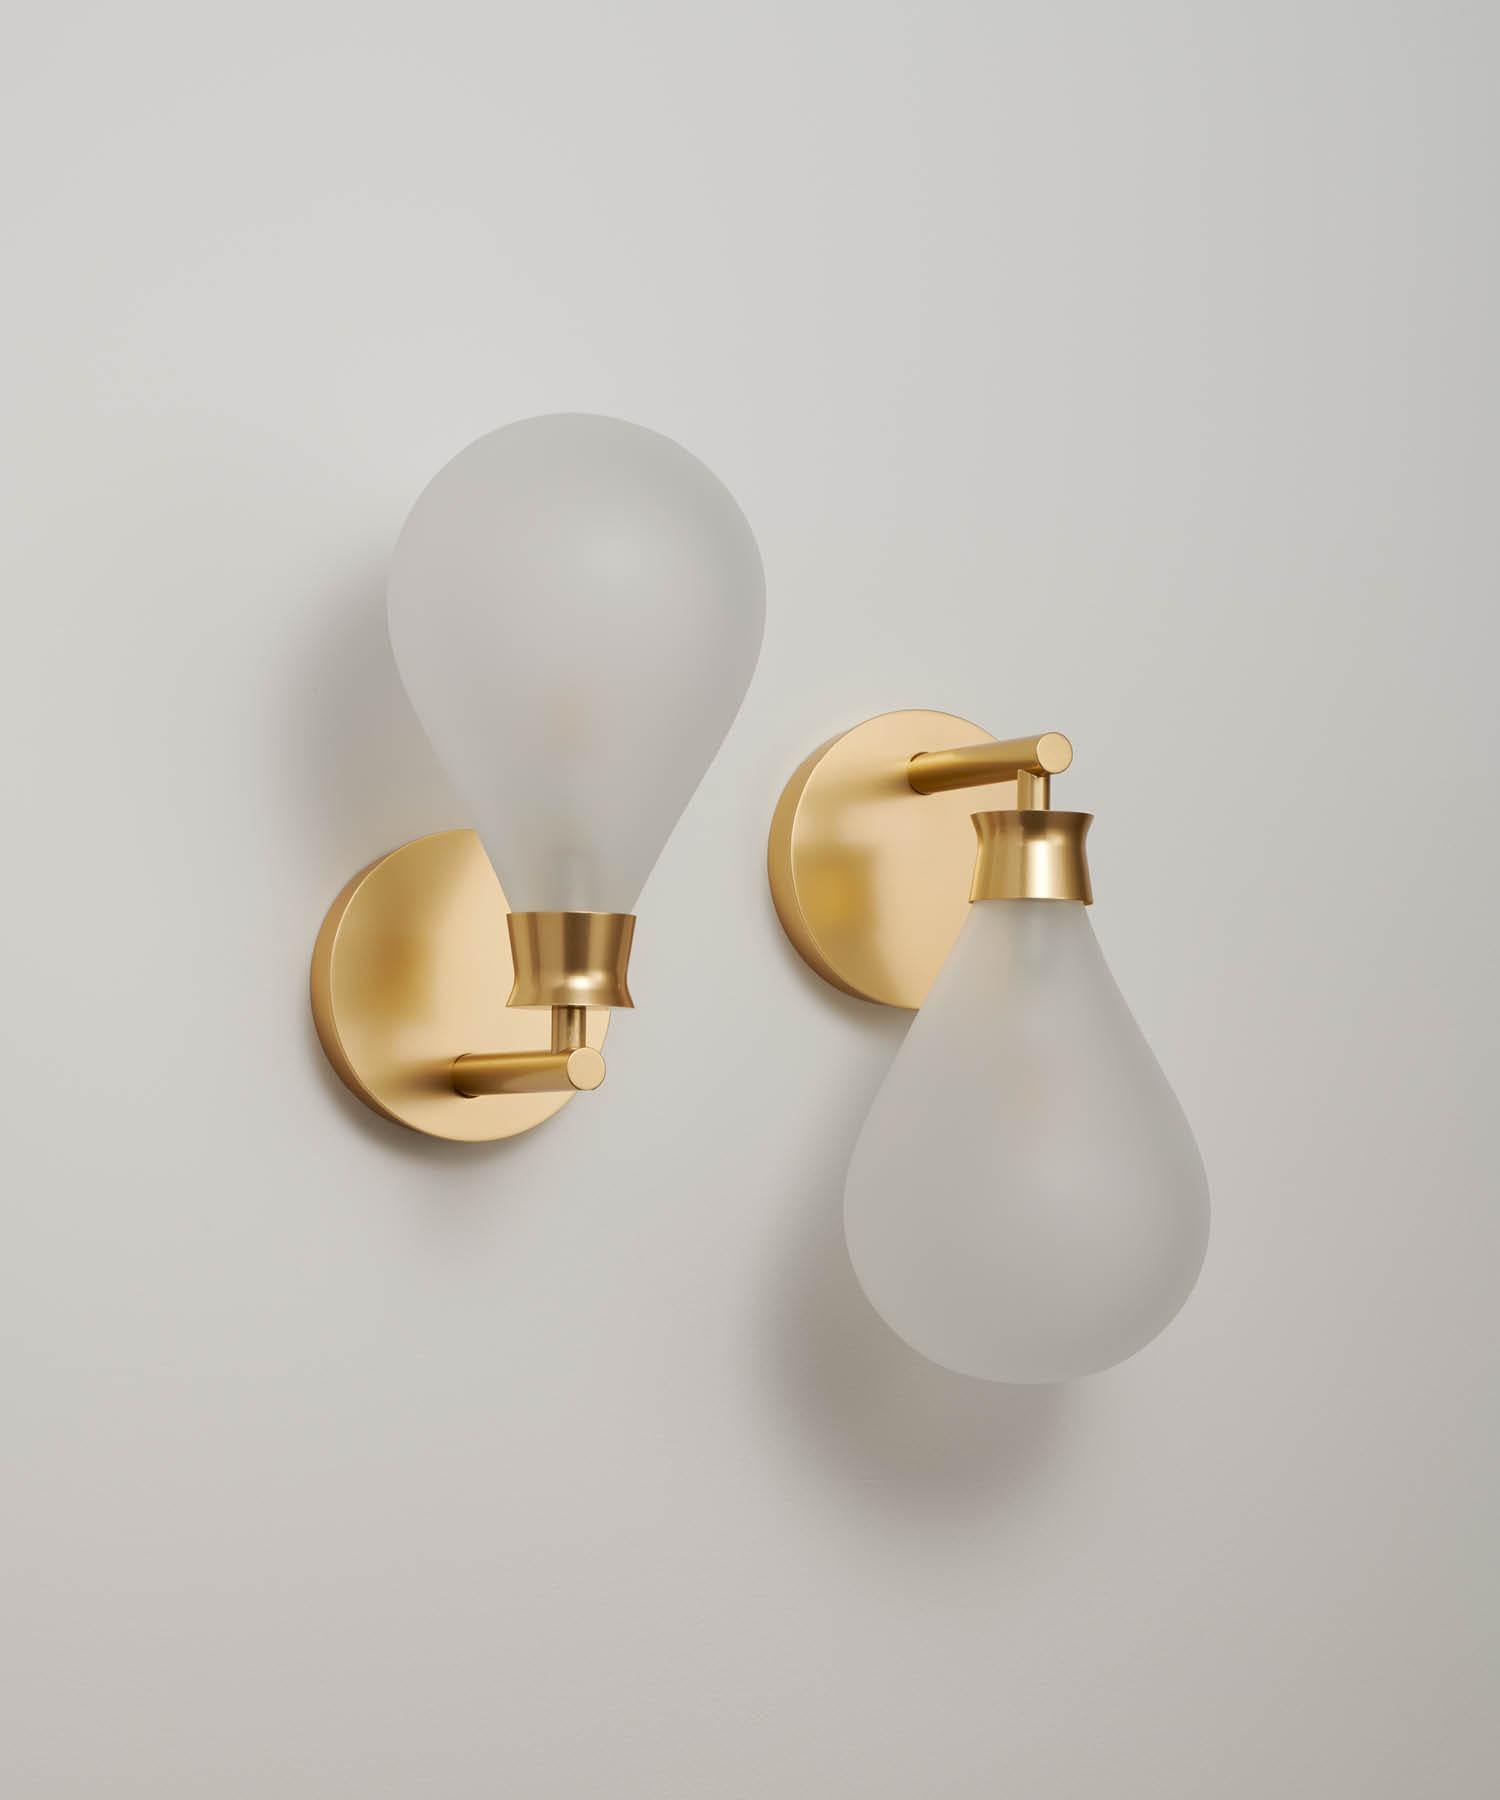 Cintola Wall Light in Polished Aluminium with Bronze Handblown Glass Globe In New Condition For Sale In London, GB